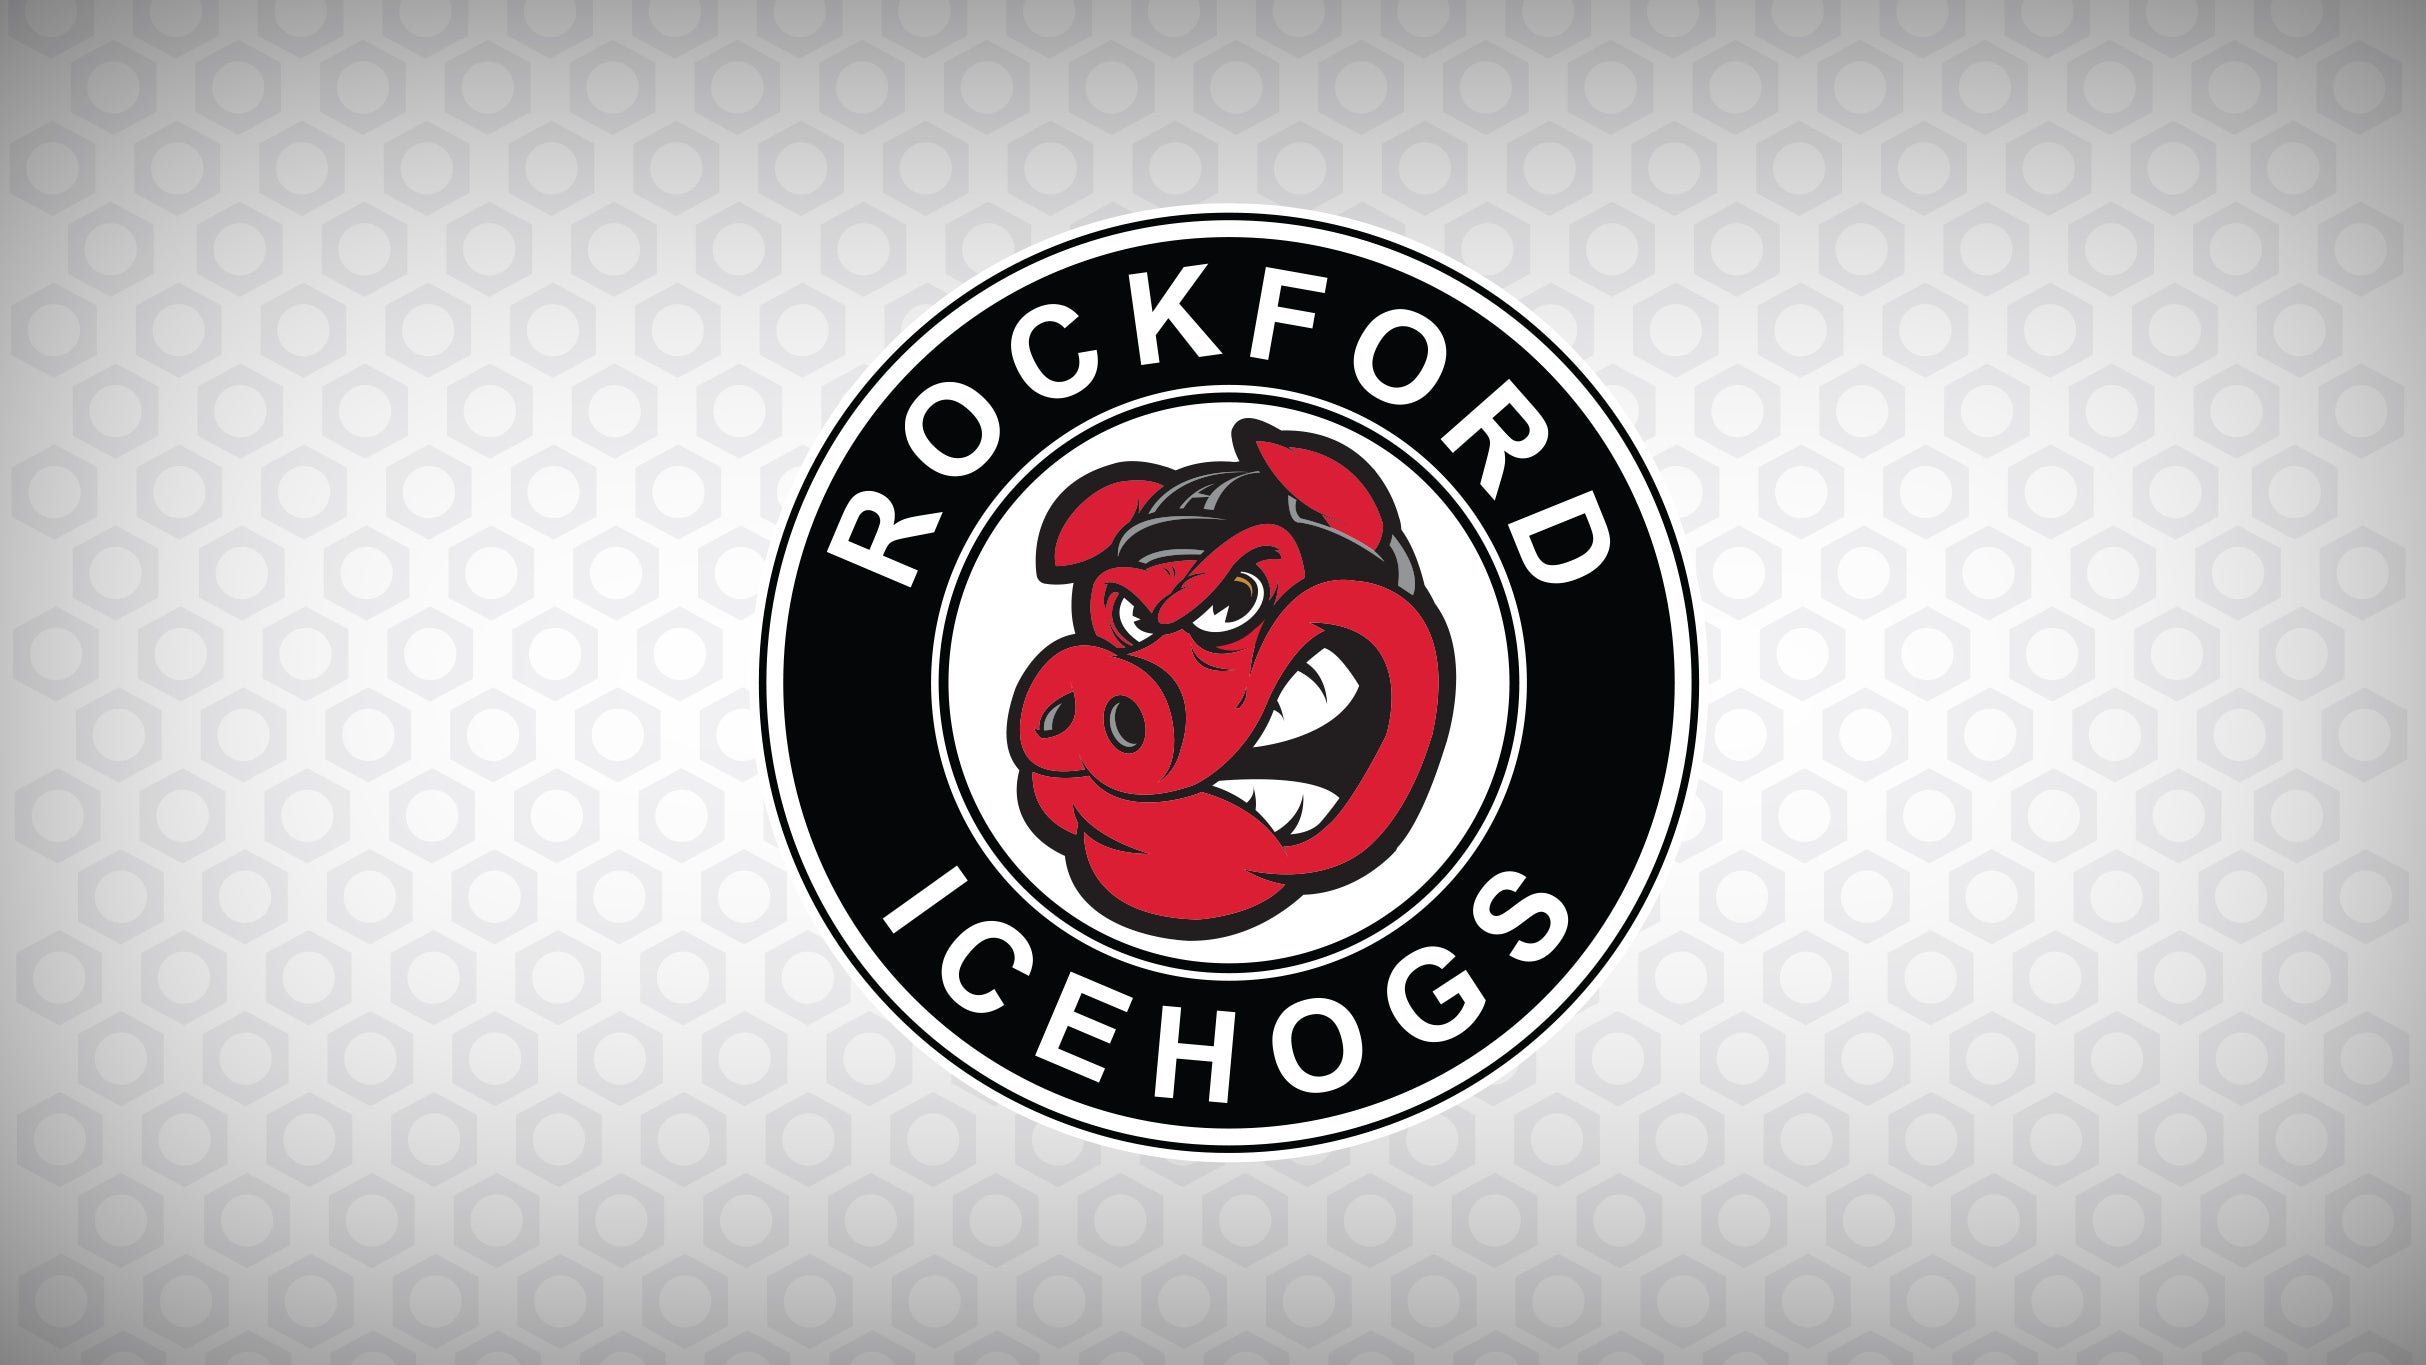 Rockford IceHogs vs. Grand Rapids Griffins at BMO Center